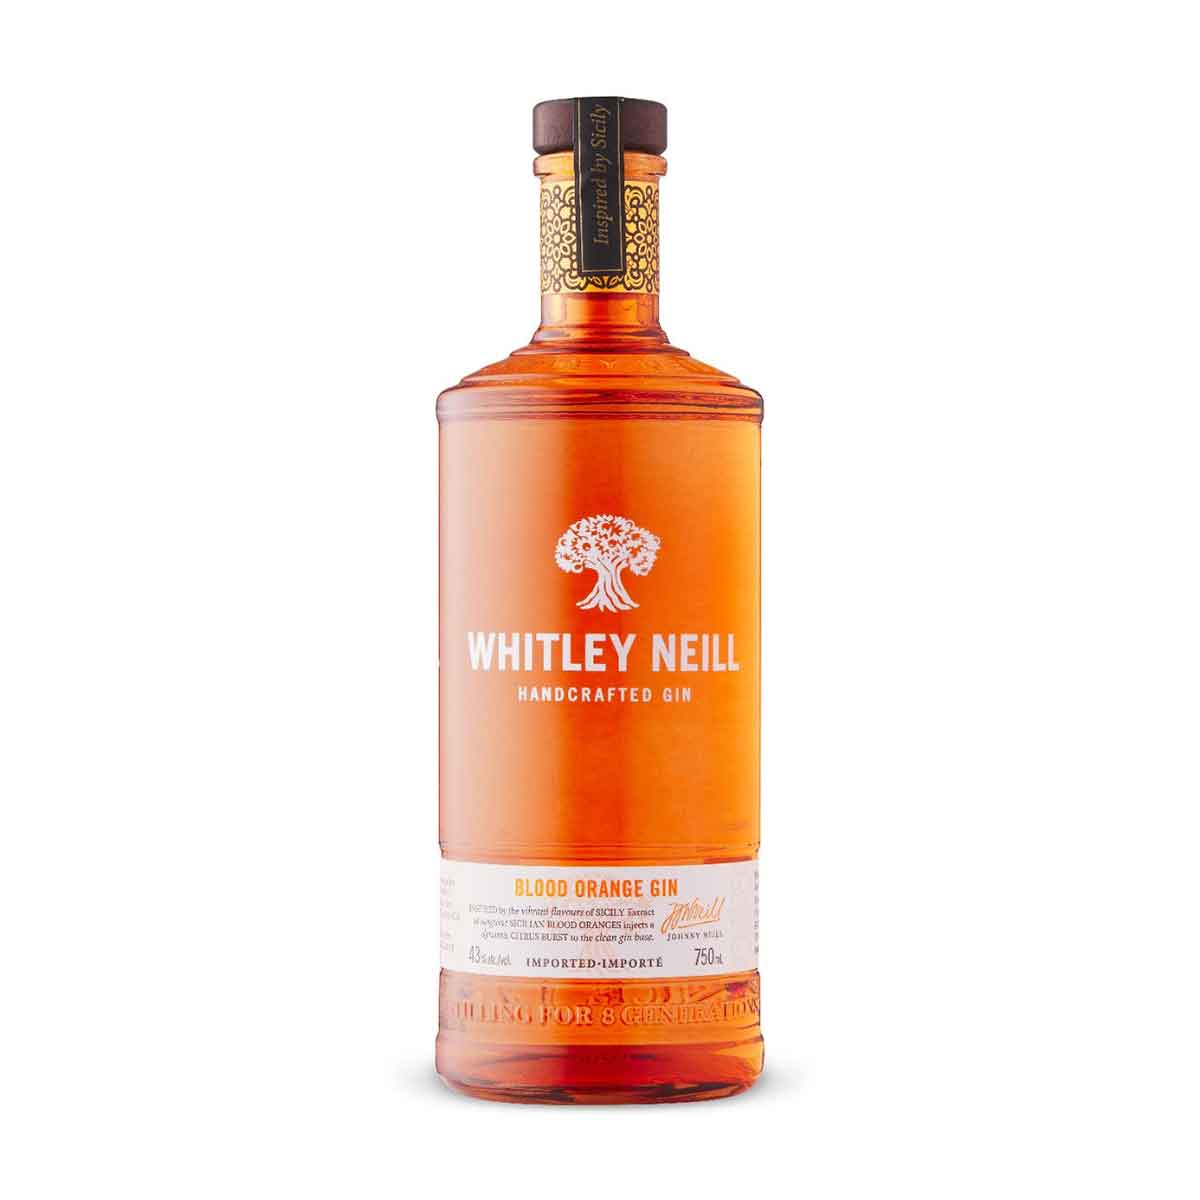 TAG Liquor Stores BC-WHITLEY NEILL BLOOD ORANGE GIN 750ML